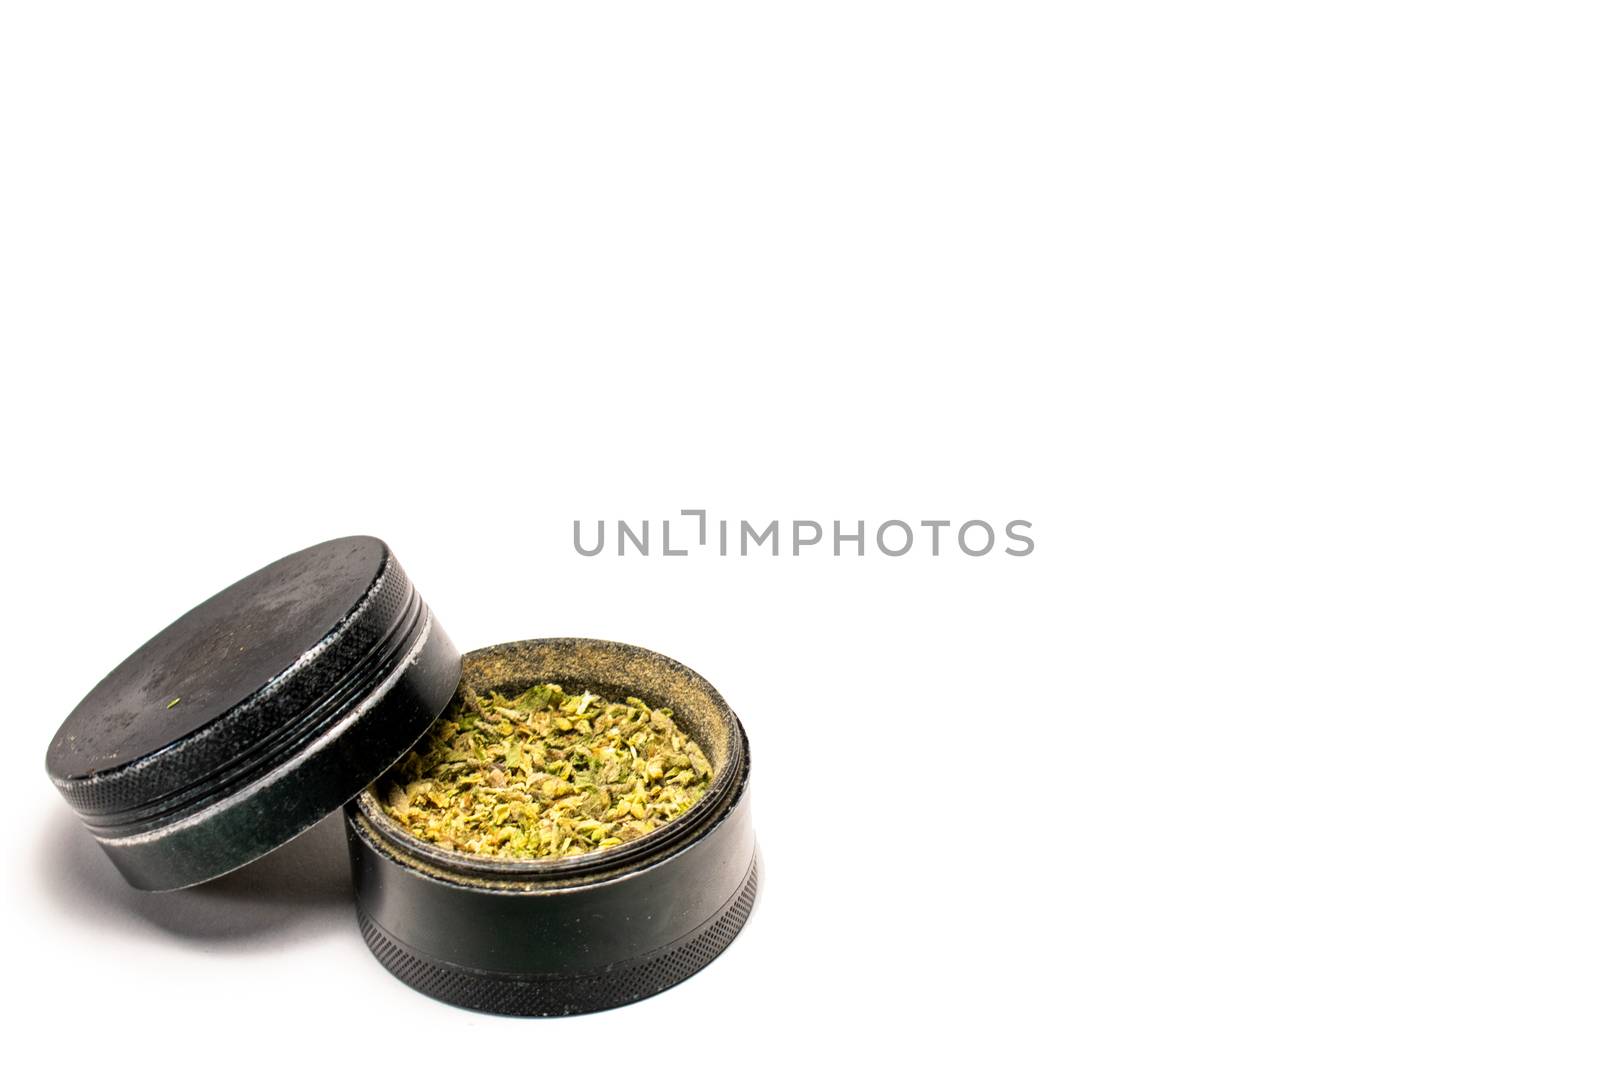 A Black Grinder Full of Green and Orange Cannabis With the Lid Leaning on the Side on a Pure White Background